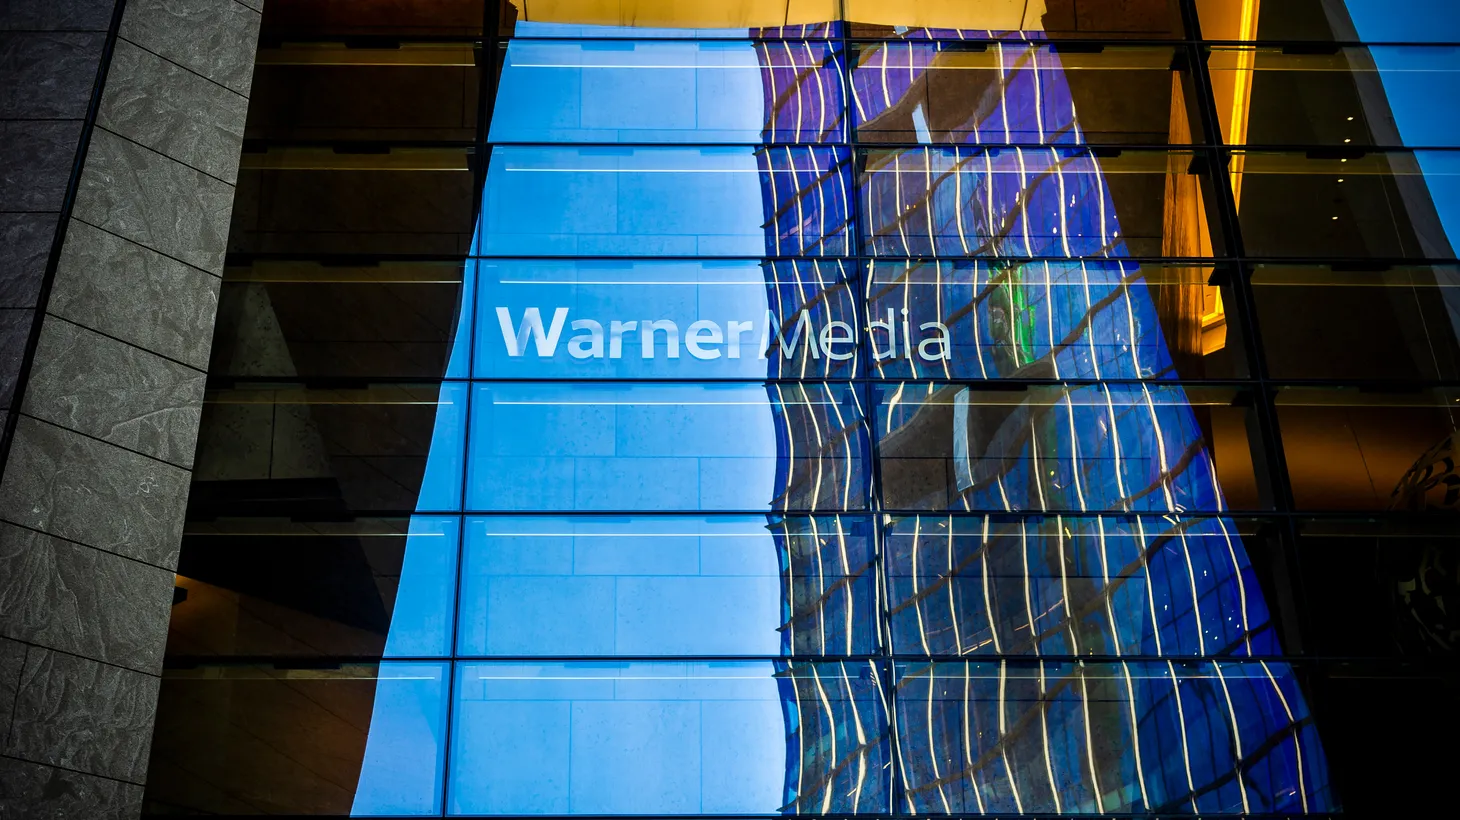 The WarnerMedia offices in Hudson Yards in New York. The merger between WarnerMedia and Discovery is expected to close on Friday April 8.